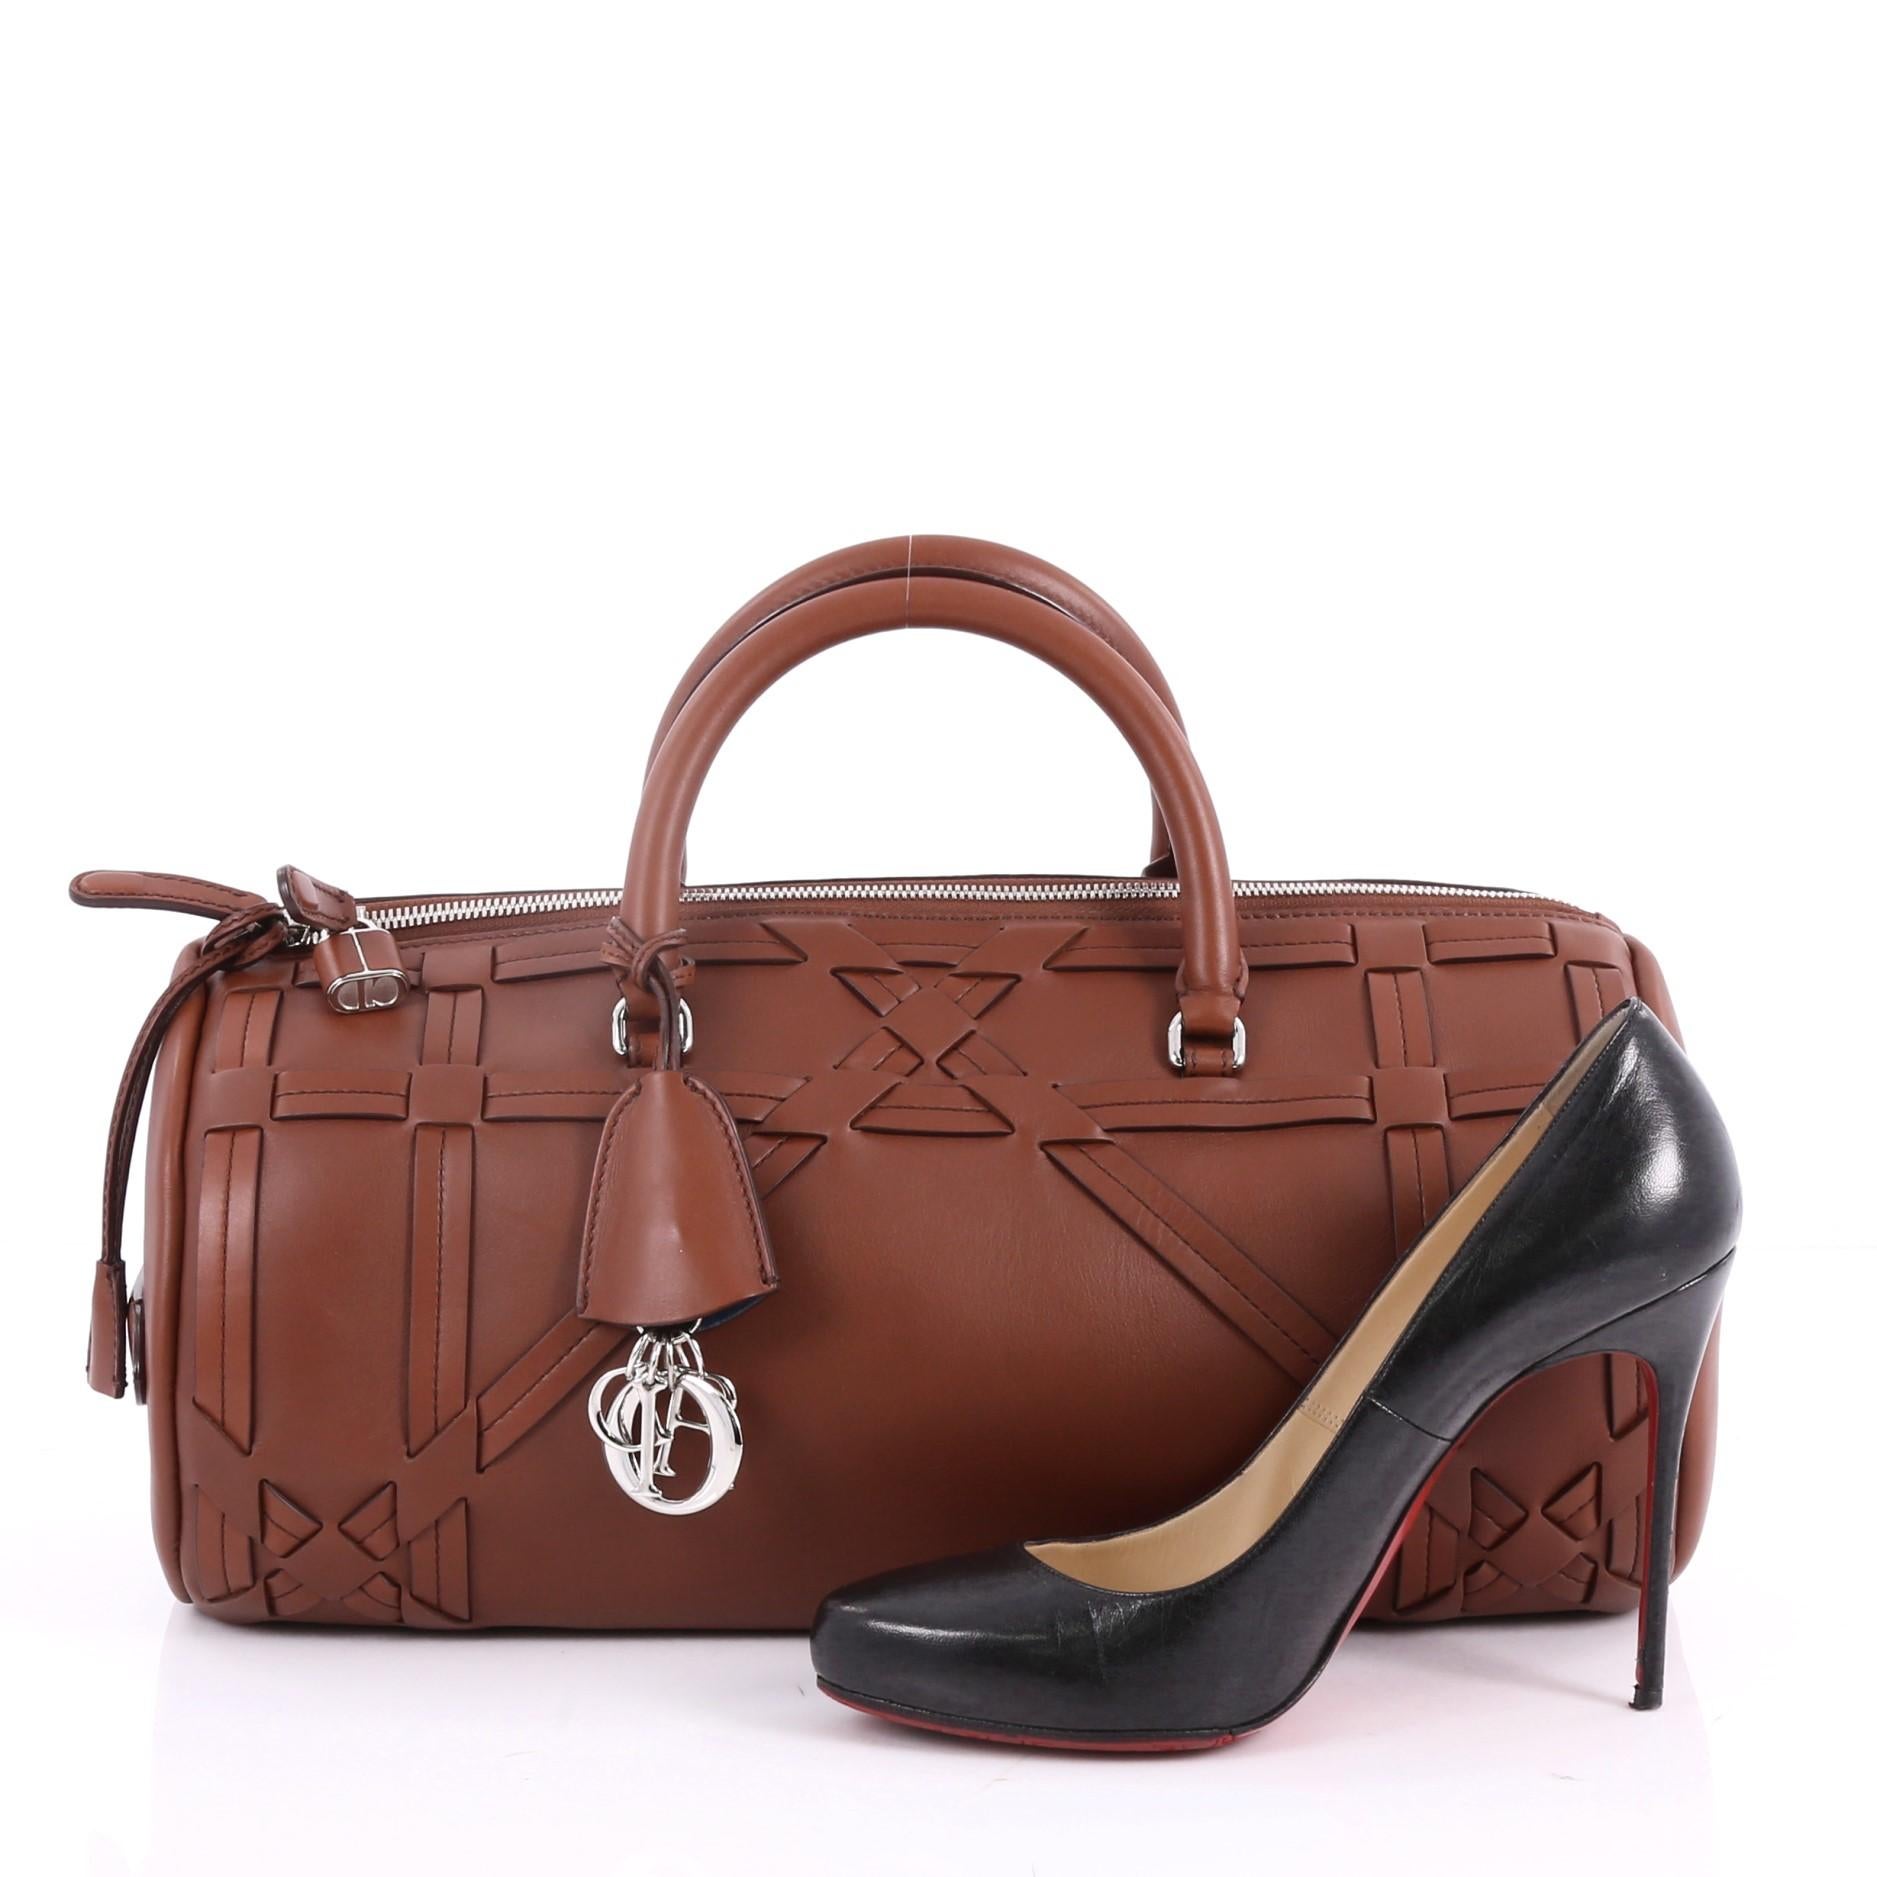 This authentic Christian Dior Connect Duffle Bag Giant Cannage Woven Leather is a gorgeous runway piece. Crafted in brown cannage woven leather, this stylish tote features dual-rolled leather handles, dual slit pockets at side, and silver-tone